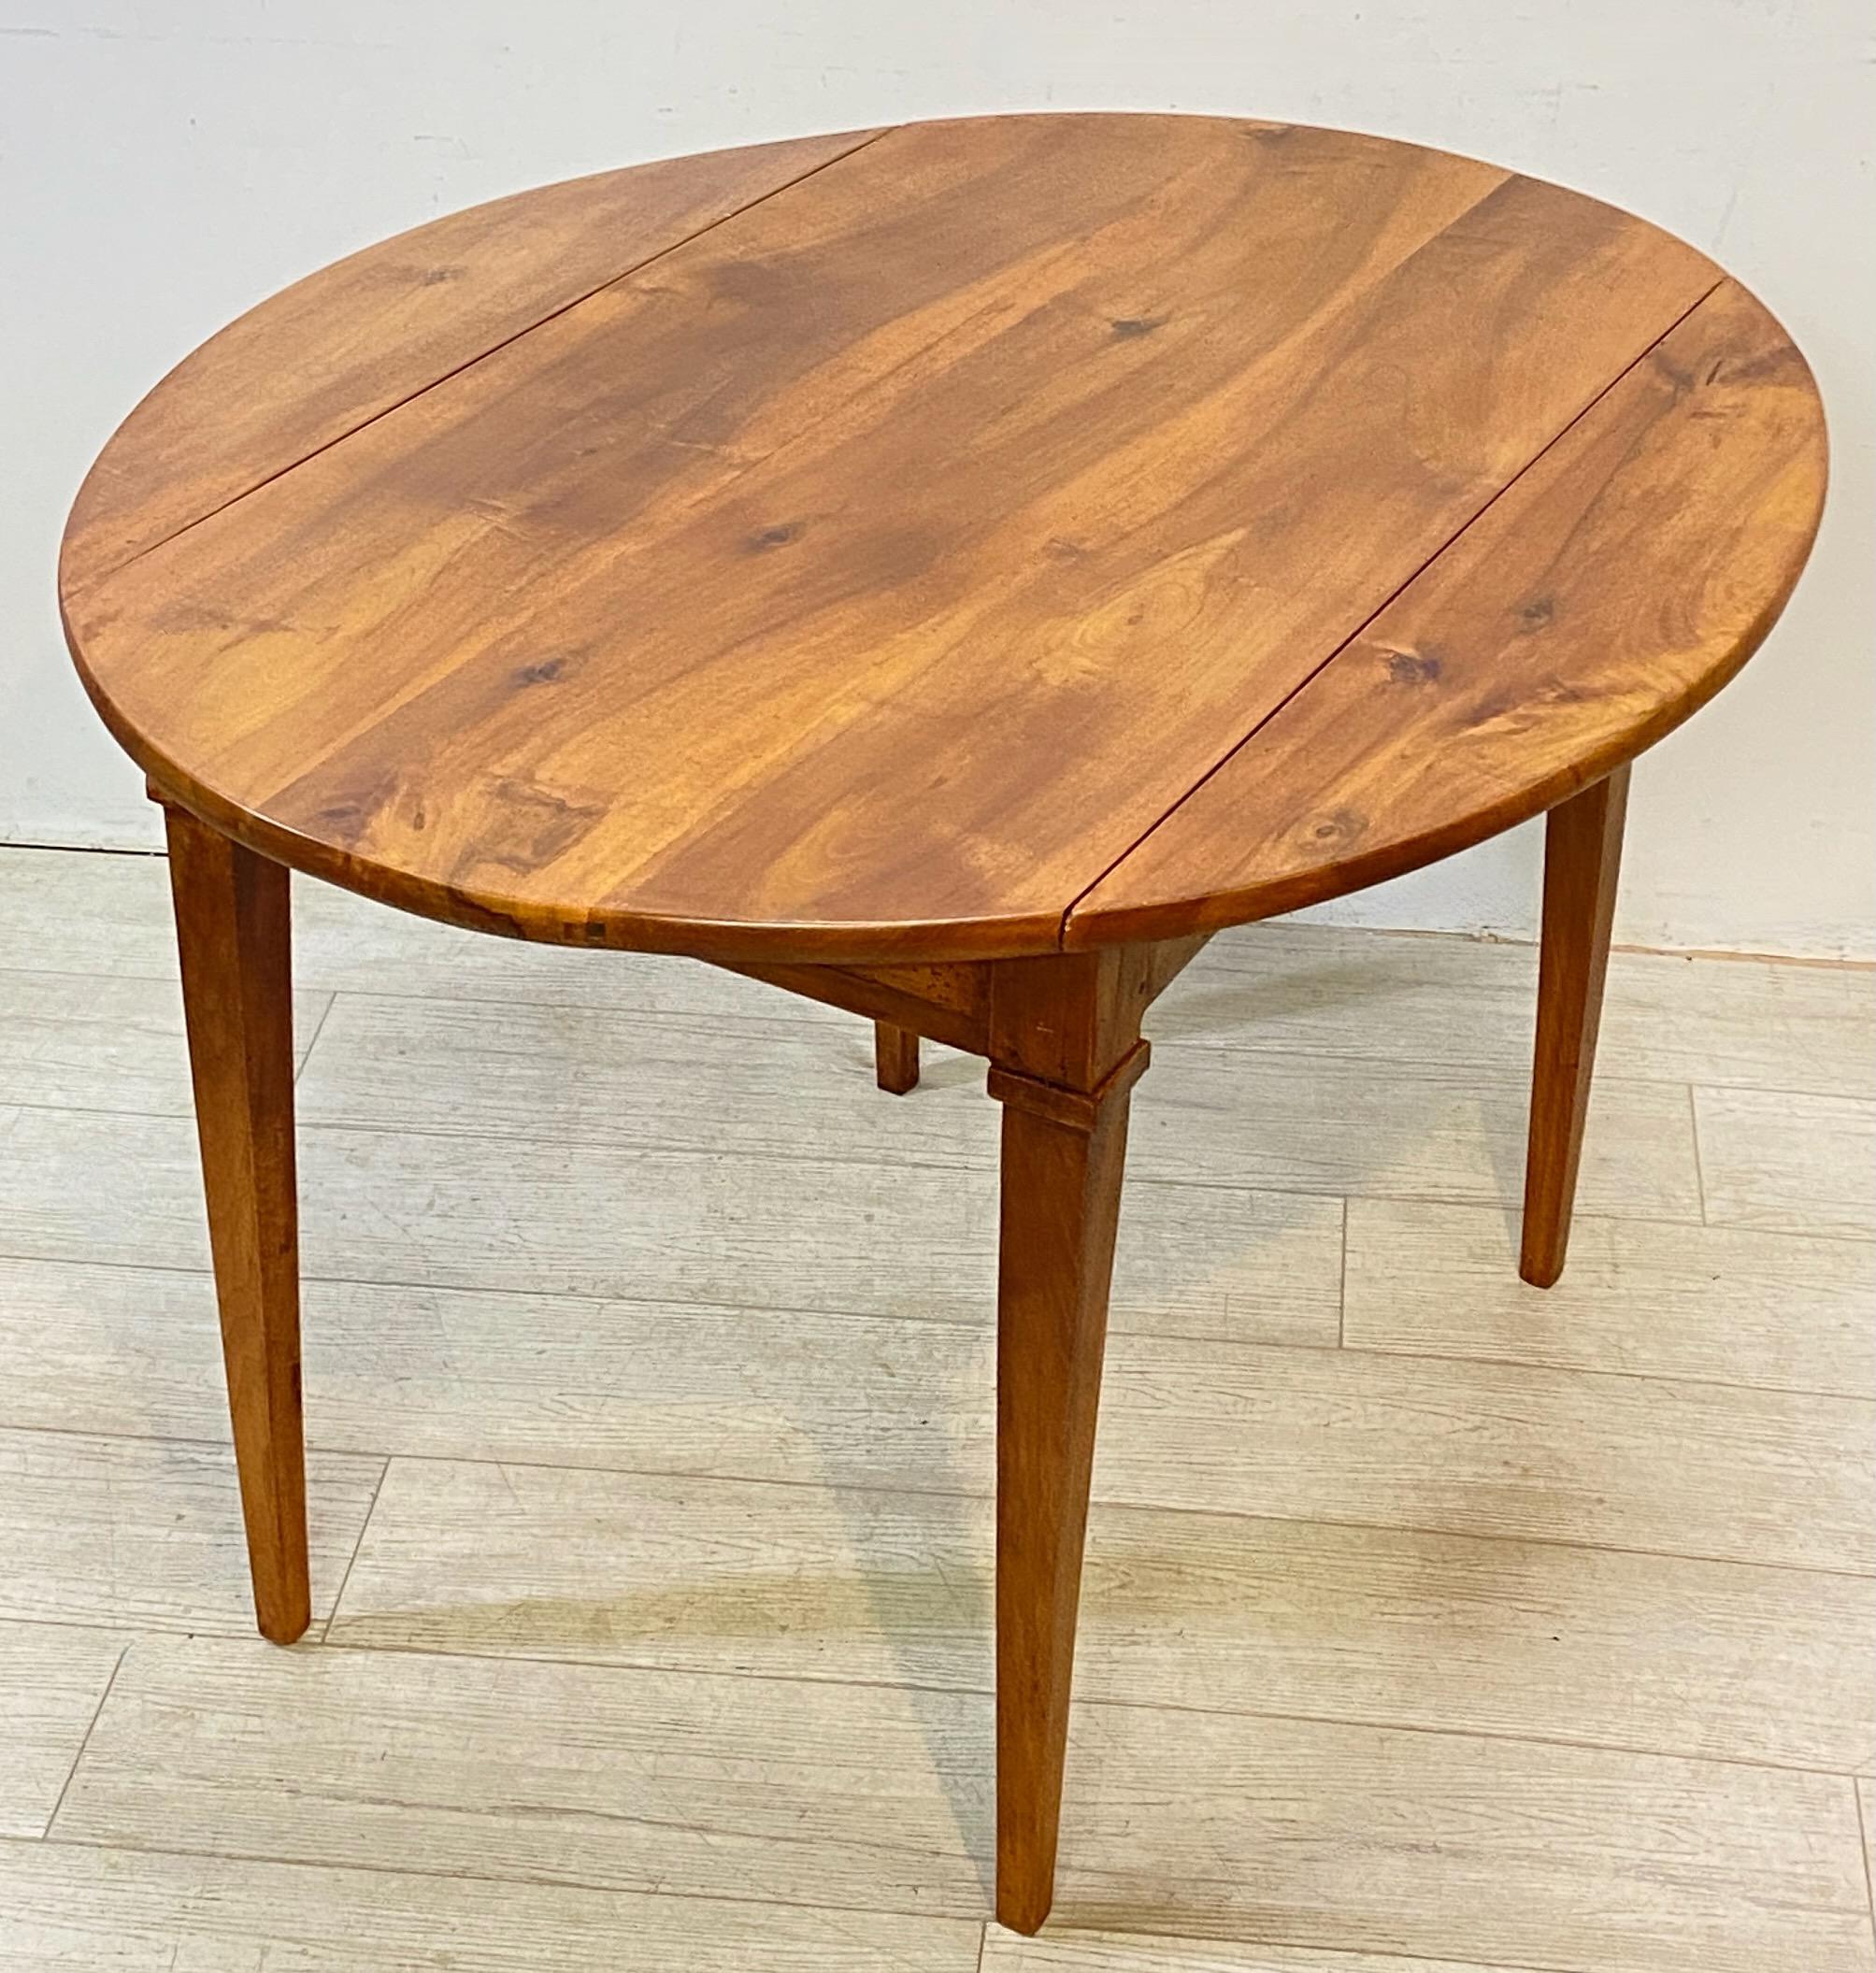 19th Century Early 19th C French Cherry Wood Elliptical Drop Leaf Dining Table, circa 1800 For Sale